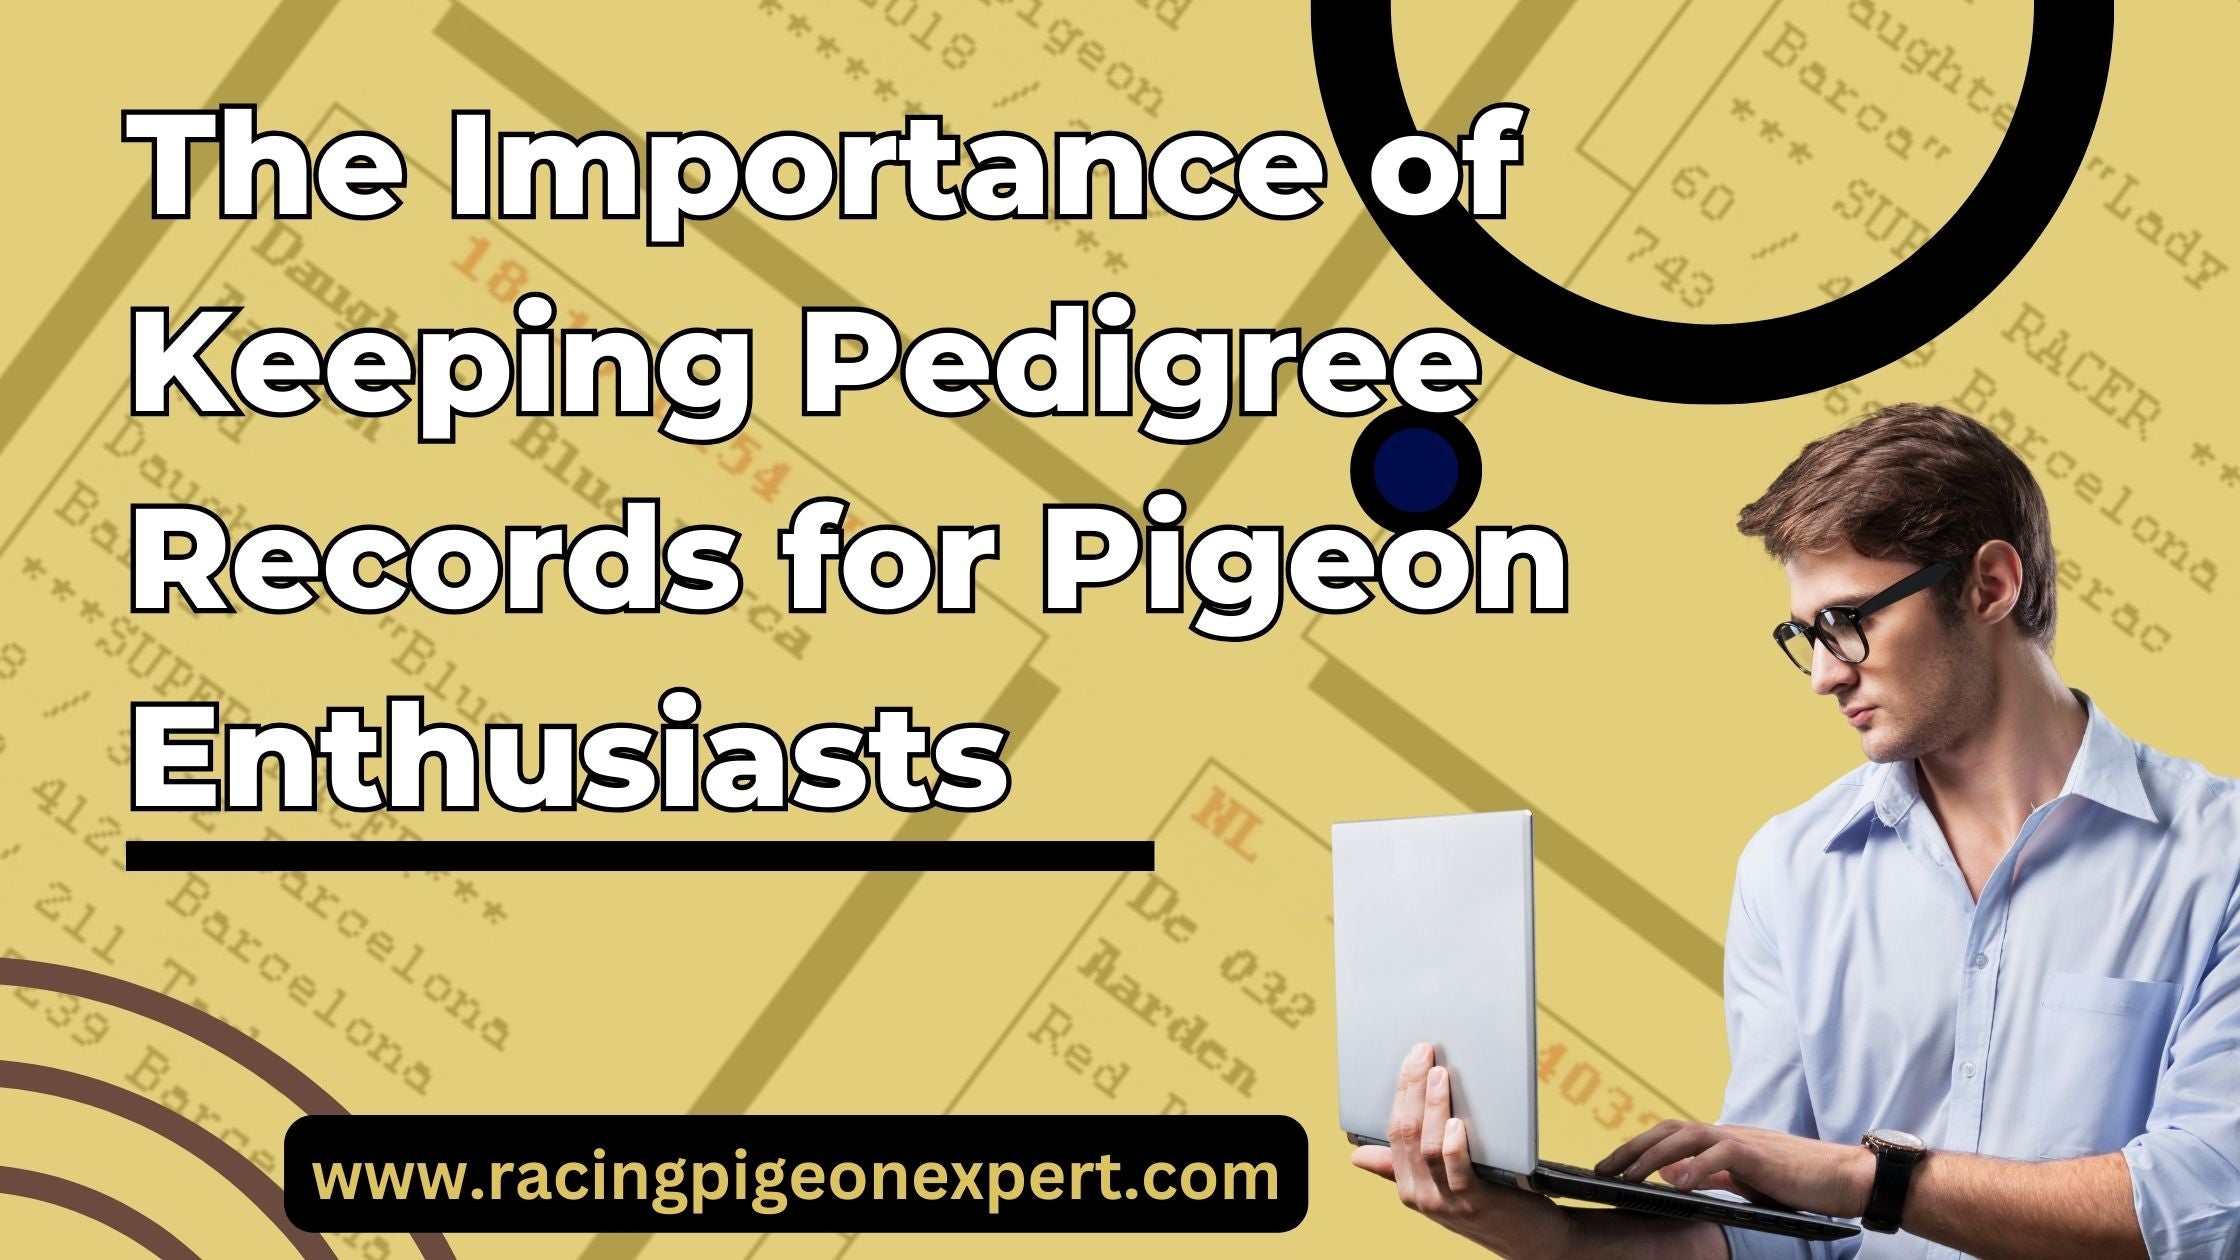 The Importance of Keeping Pedigree Records for Pigeon Enthusiasts